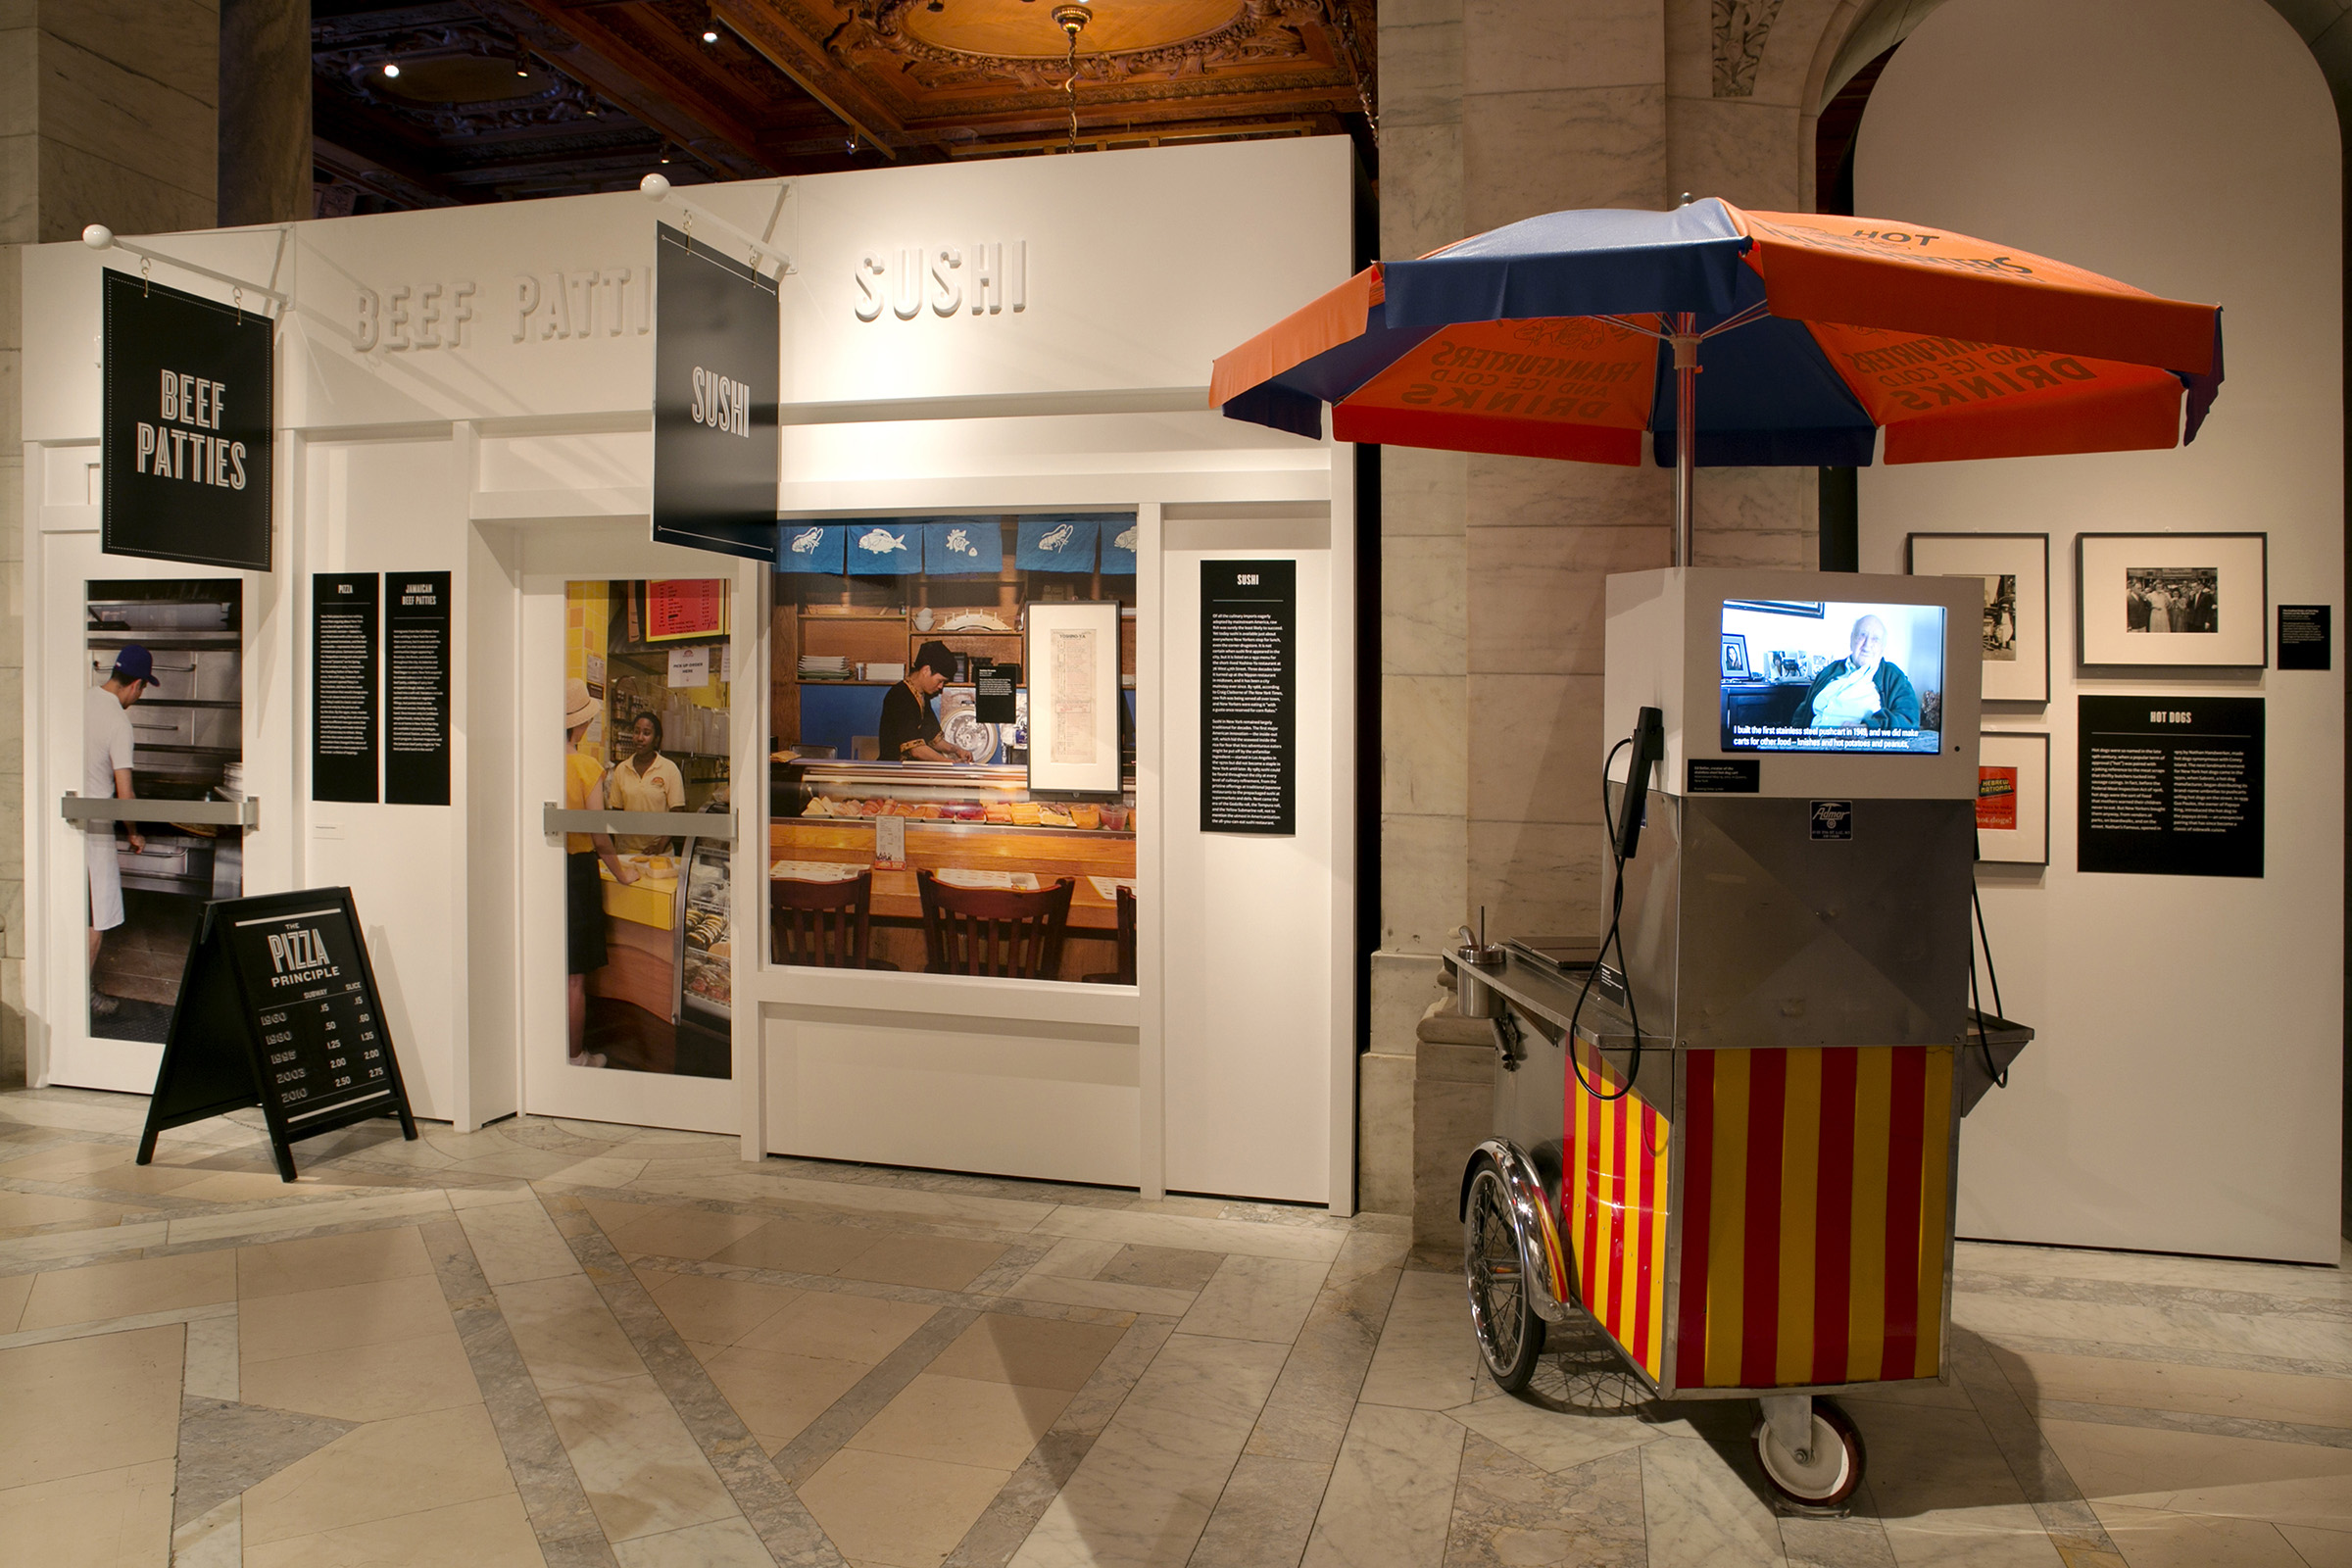 Lunch Hour - In the “Street Food” section, P+A repurposed a hot dog cart to show a video of Ed Bella, the inventor of the ubiquitous stainless-steel push cart.